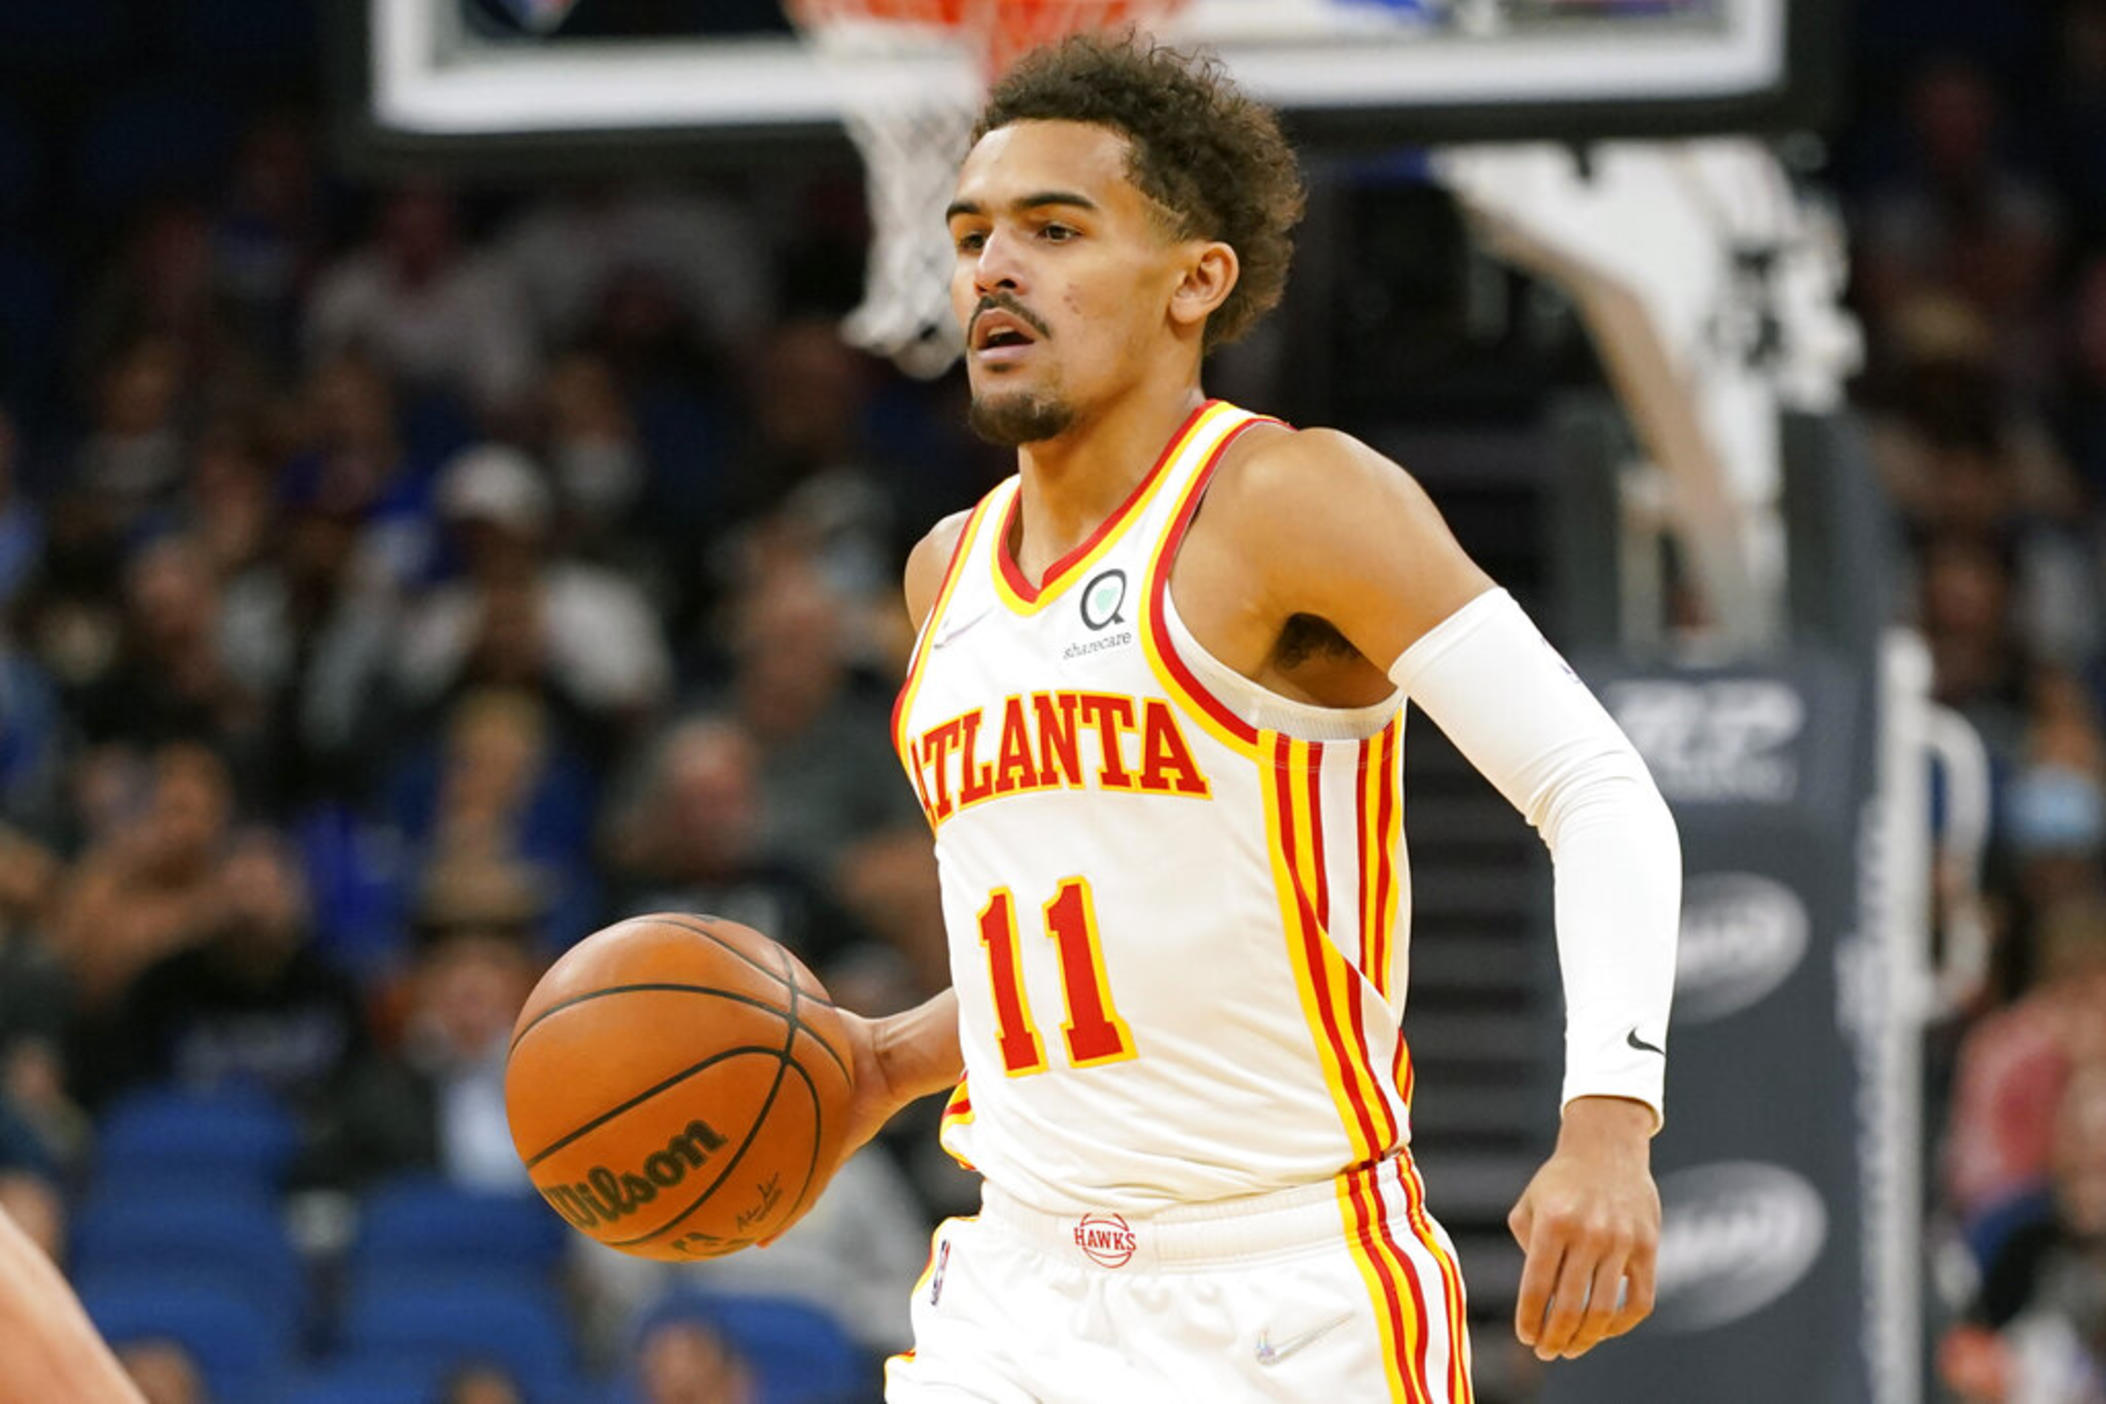 Atlanta Hawks guard Trae Young (11) moves the ball against the Orlando Magic during the first half of an NBA basketball game, Wednesday, Dec. 15, 2021, in Orlando, Fla. (AP Photo/John Raoux)